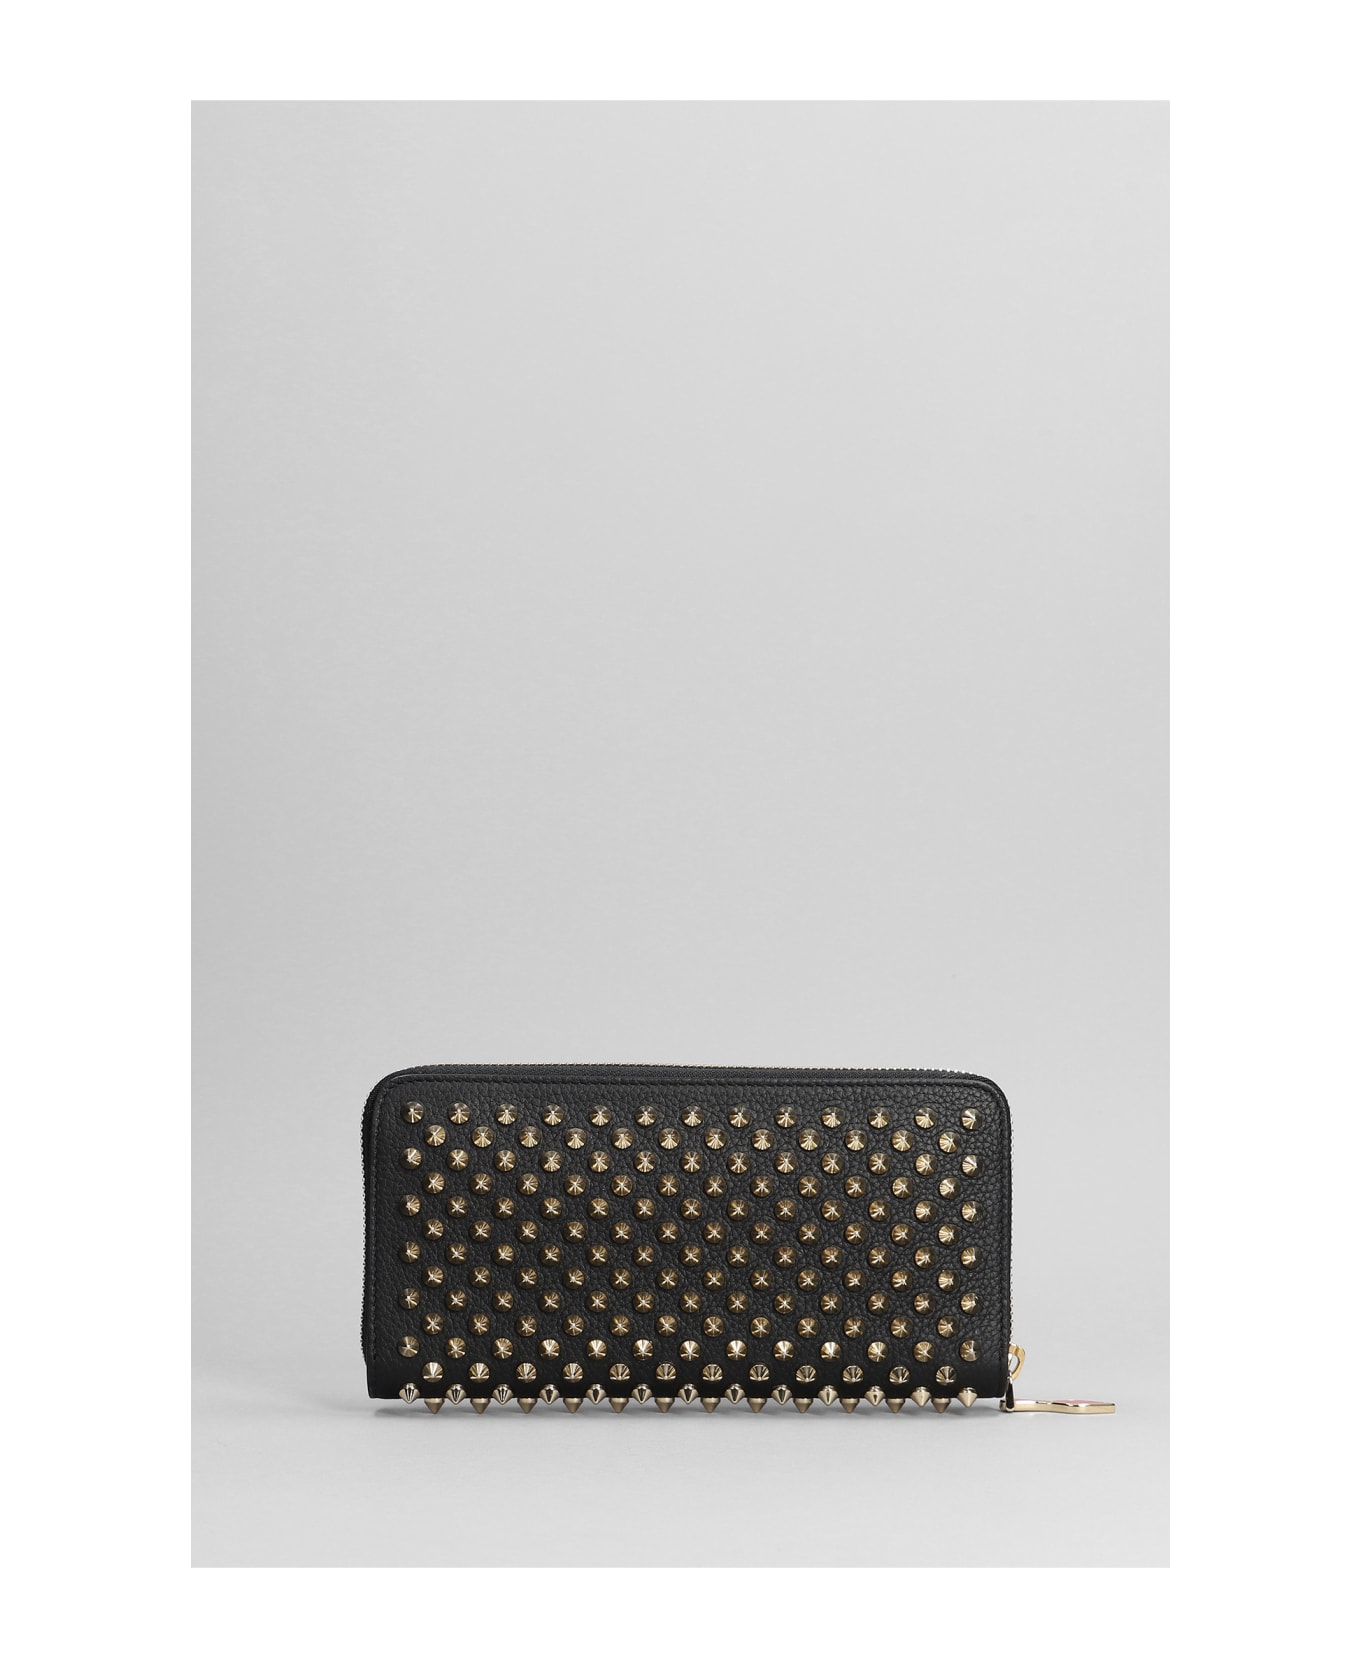 Christian Louboutin Panettone Wallet In Black Leather - Black